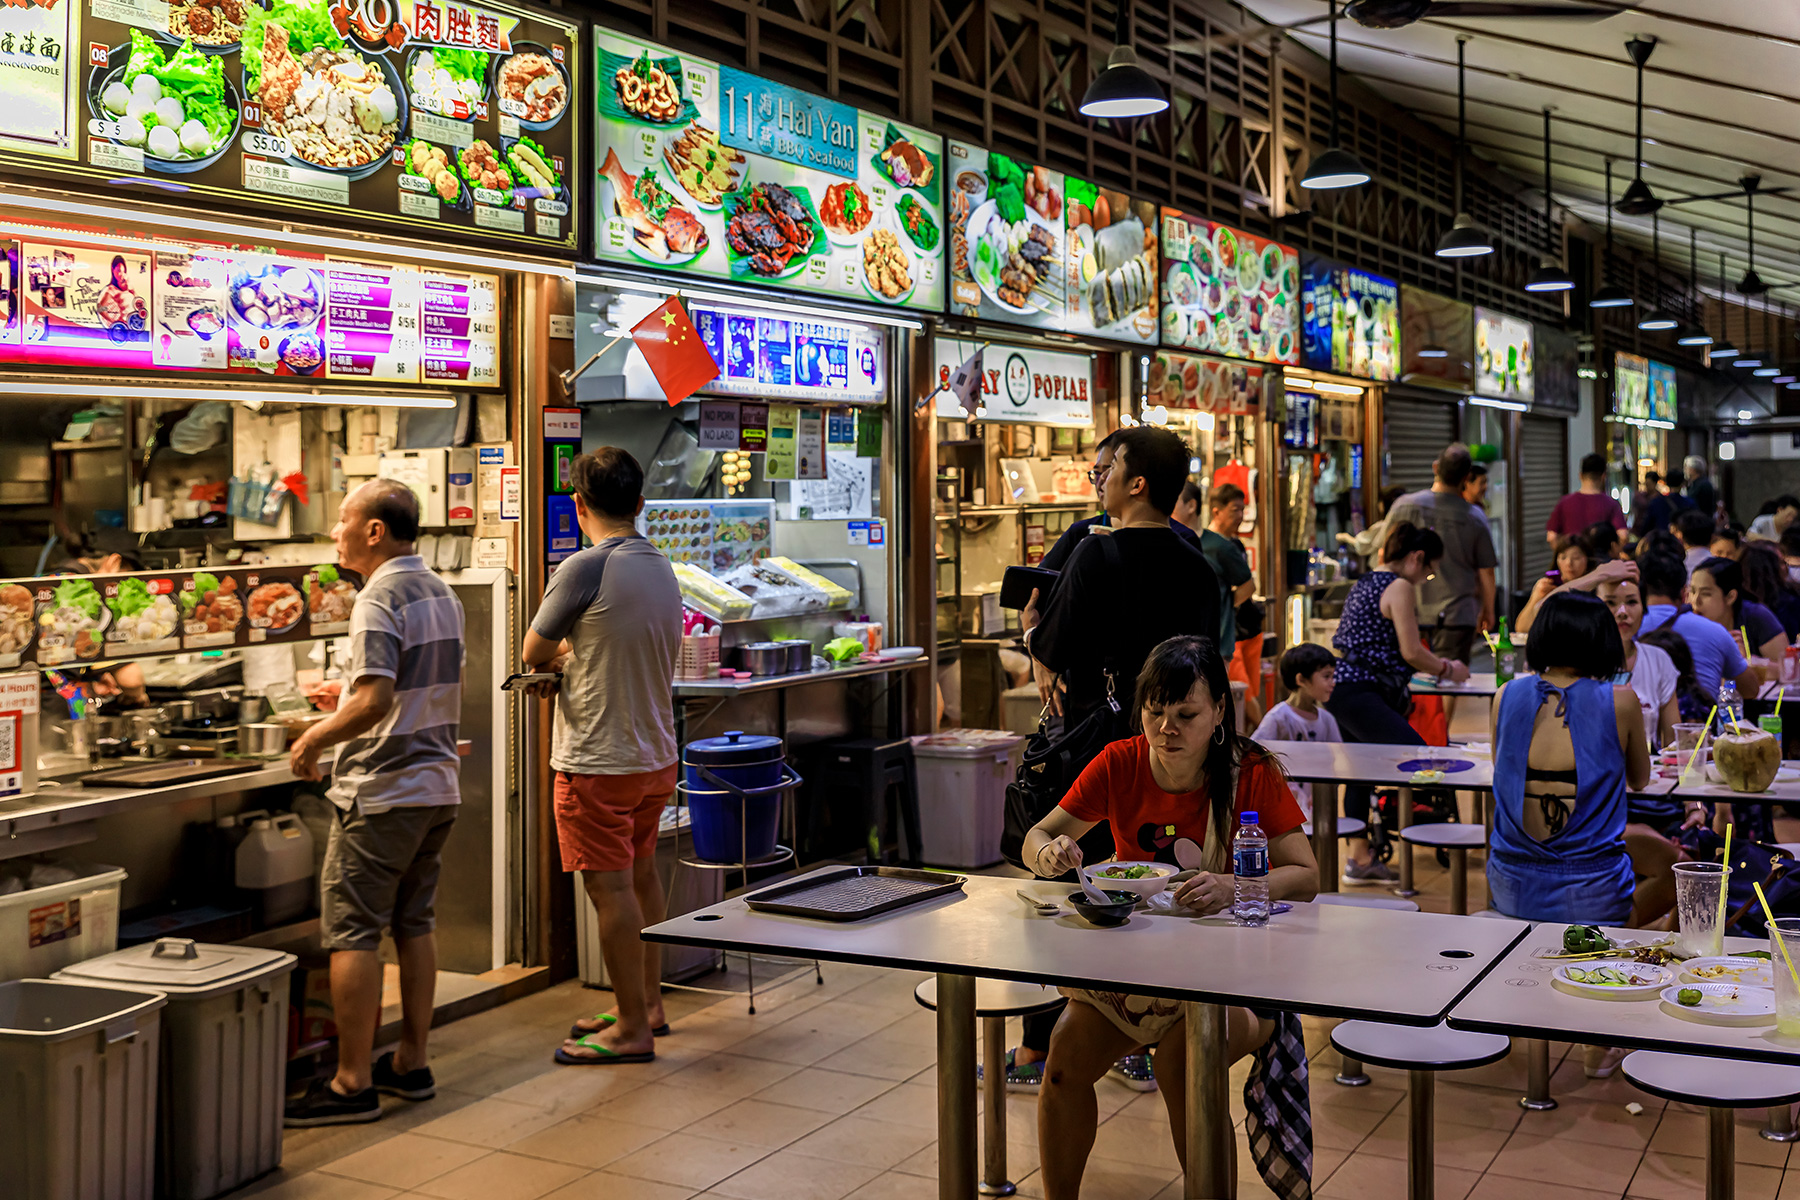 People eating and ordering at a hawker center in Lau Pa Sat Telok Ayer Market